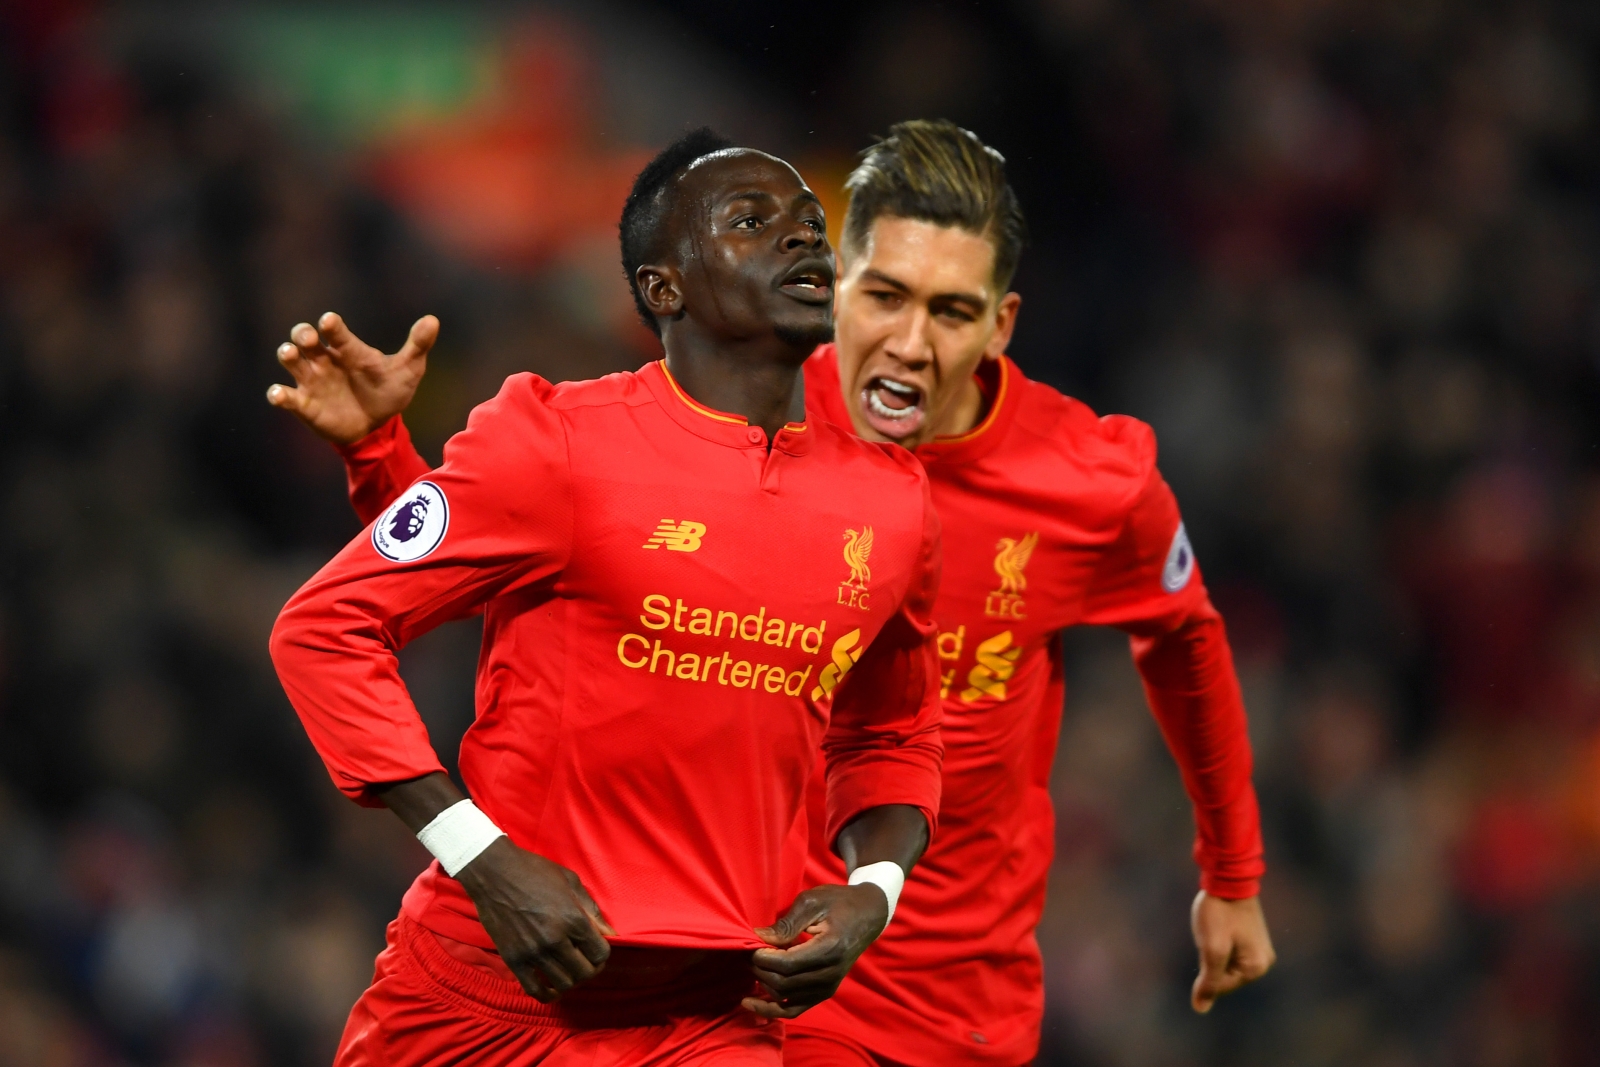 Sadio Mane's agent says four other clubs tried to sign Liverpool forward